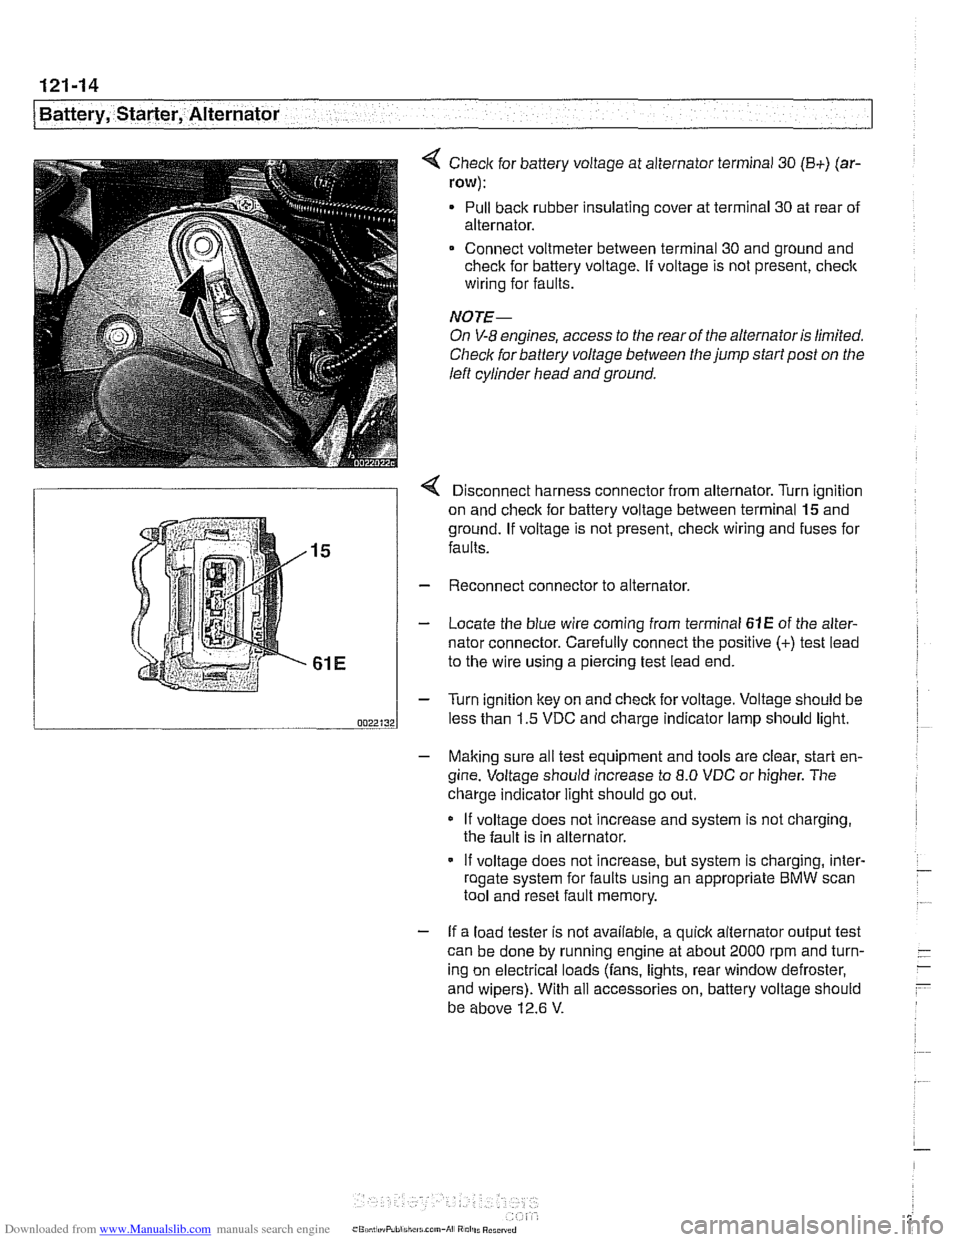 BMW 528i 1999 E39 Workshop Manual Downloaded from www.Manualslib.com manuals search engine 
- - 
/Battery, Starter,  Alternator -- - -. - --I 
< Check for battery  voltage  at alternator  terminal 30 (B+) (ar- 
row): 
Pull back rubber